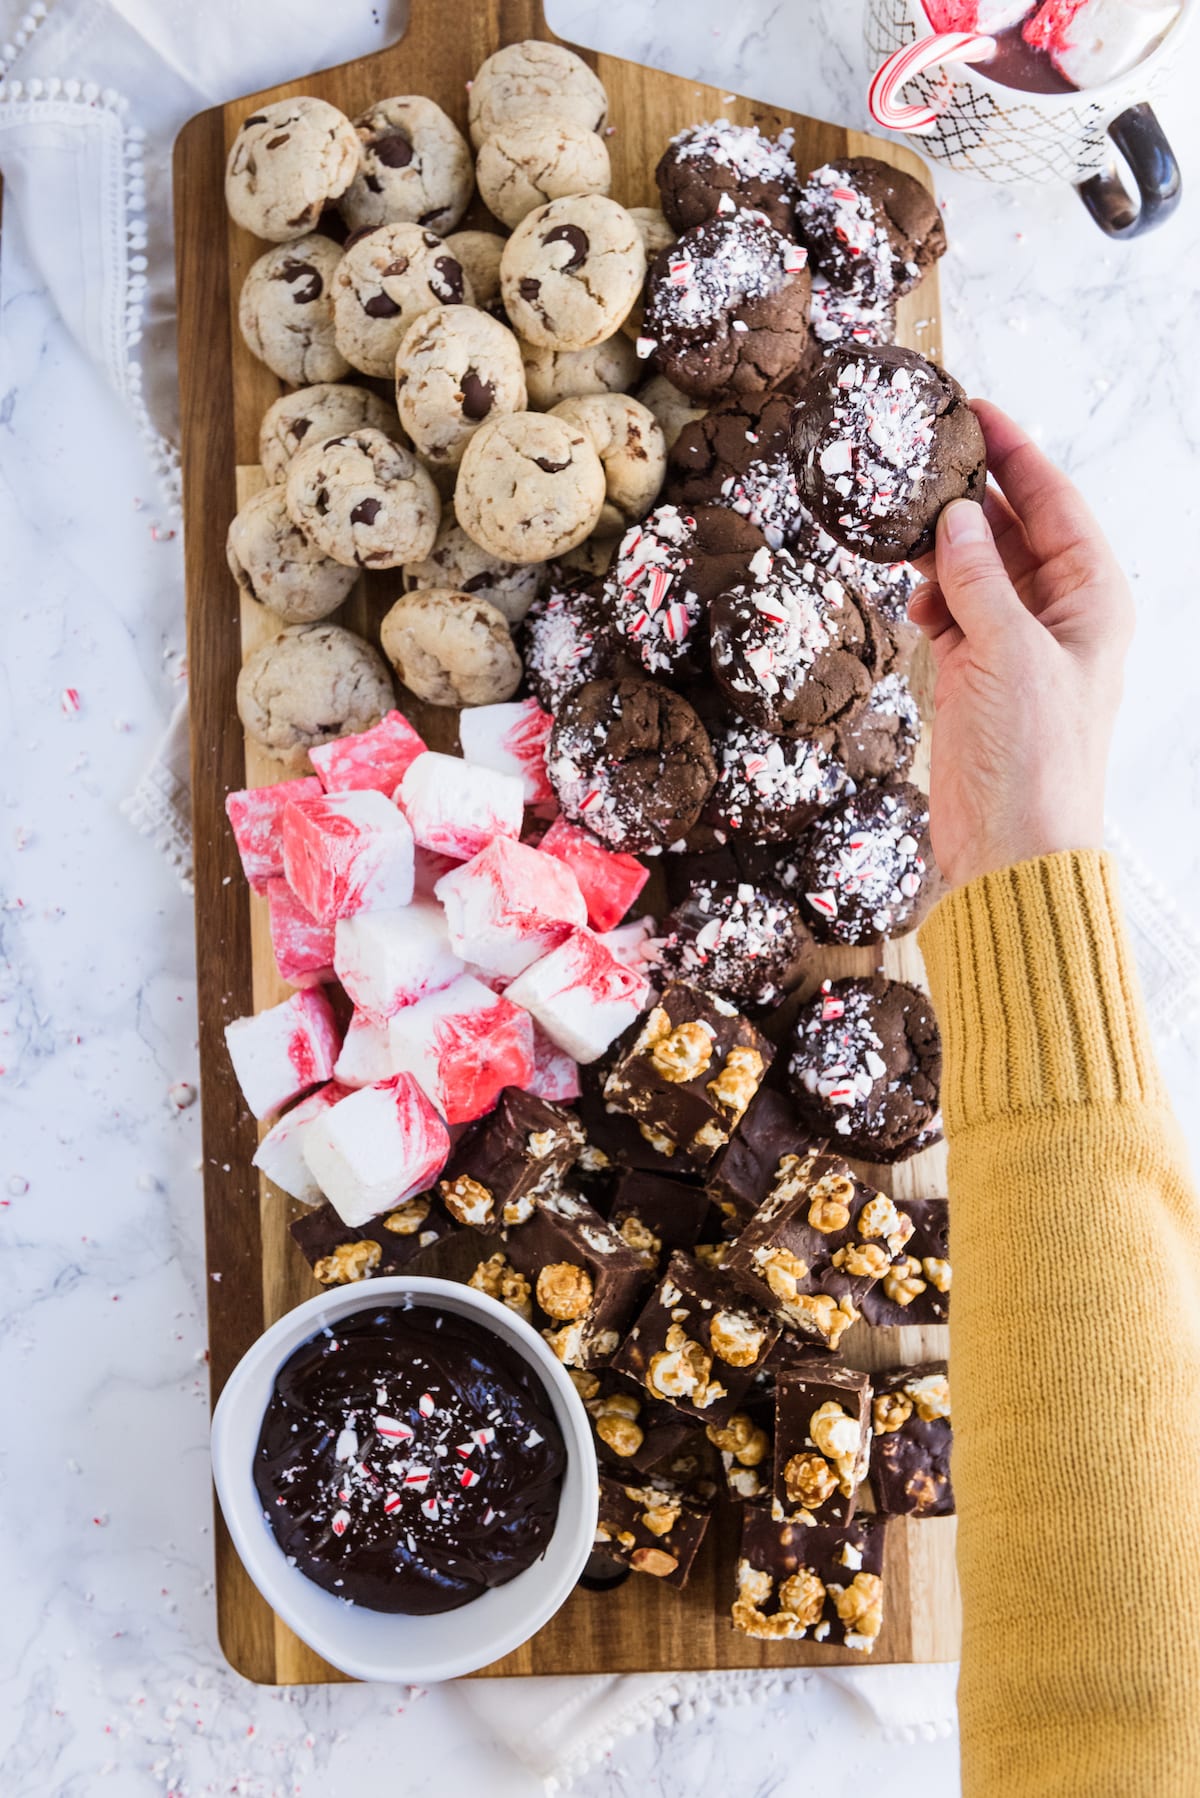 Elevate your yearly cookie platter game with an epic Christmas cookie board! Get the best Christmas cookie recipes, Christmas party ideas, entertaining tips, Christmas cocktails and more from entertaining blog @cydconverse